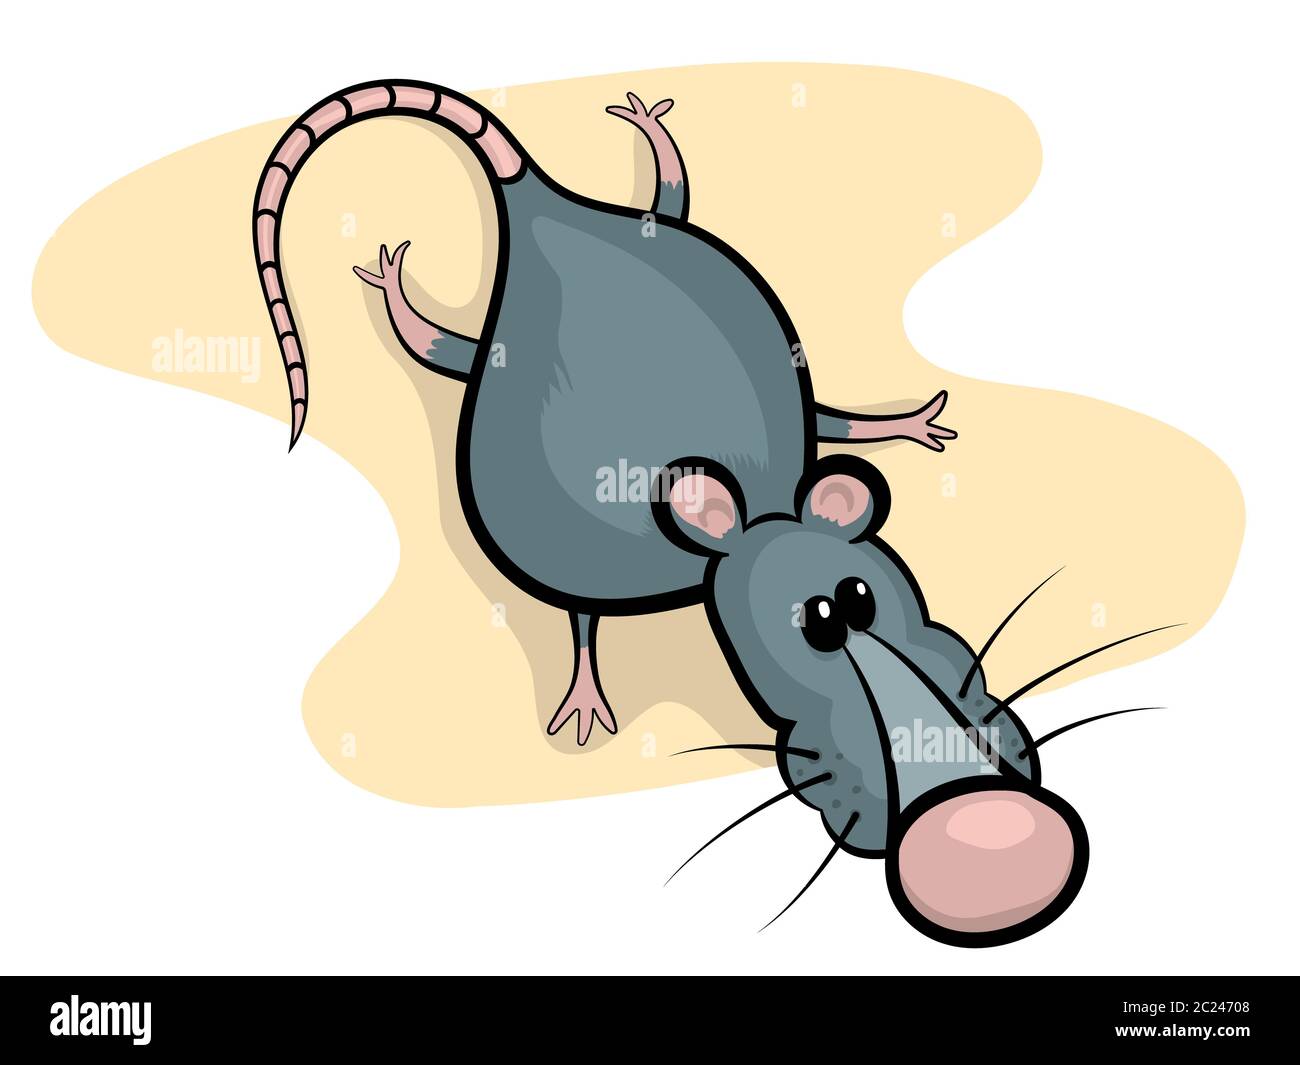 Gray rat with pink nose cartoon character vector illustration Stock Photo